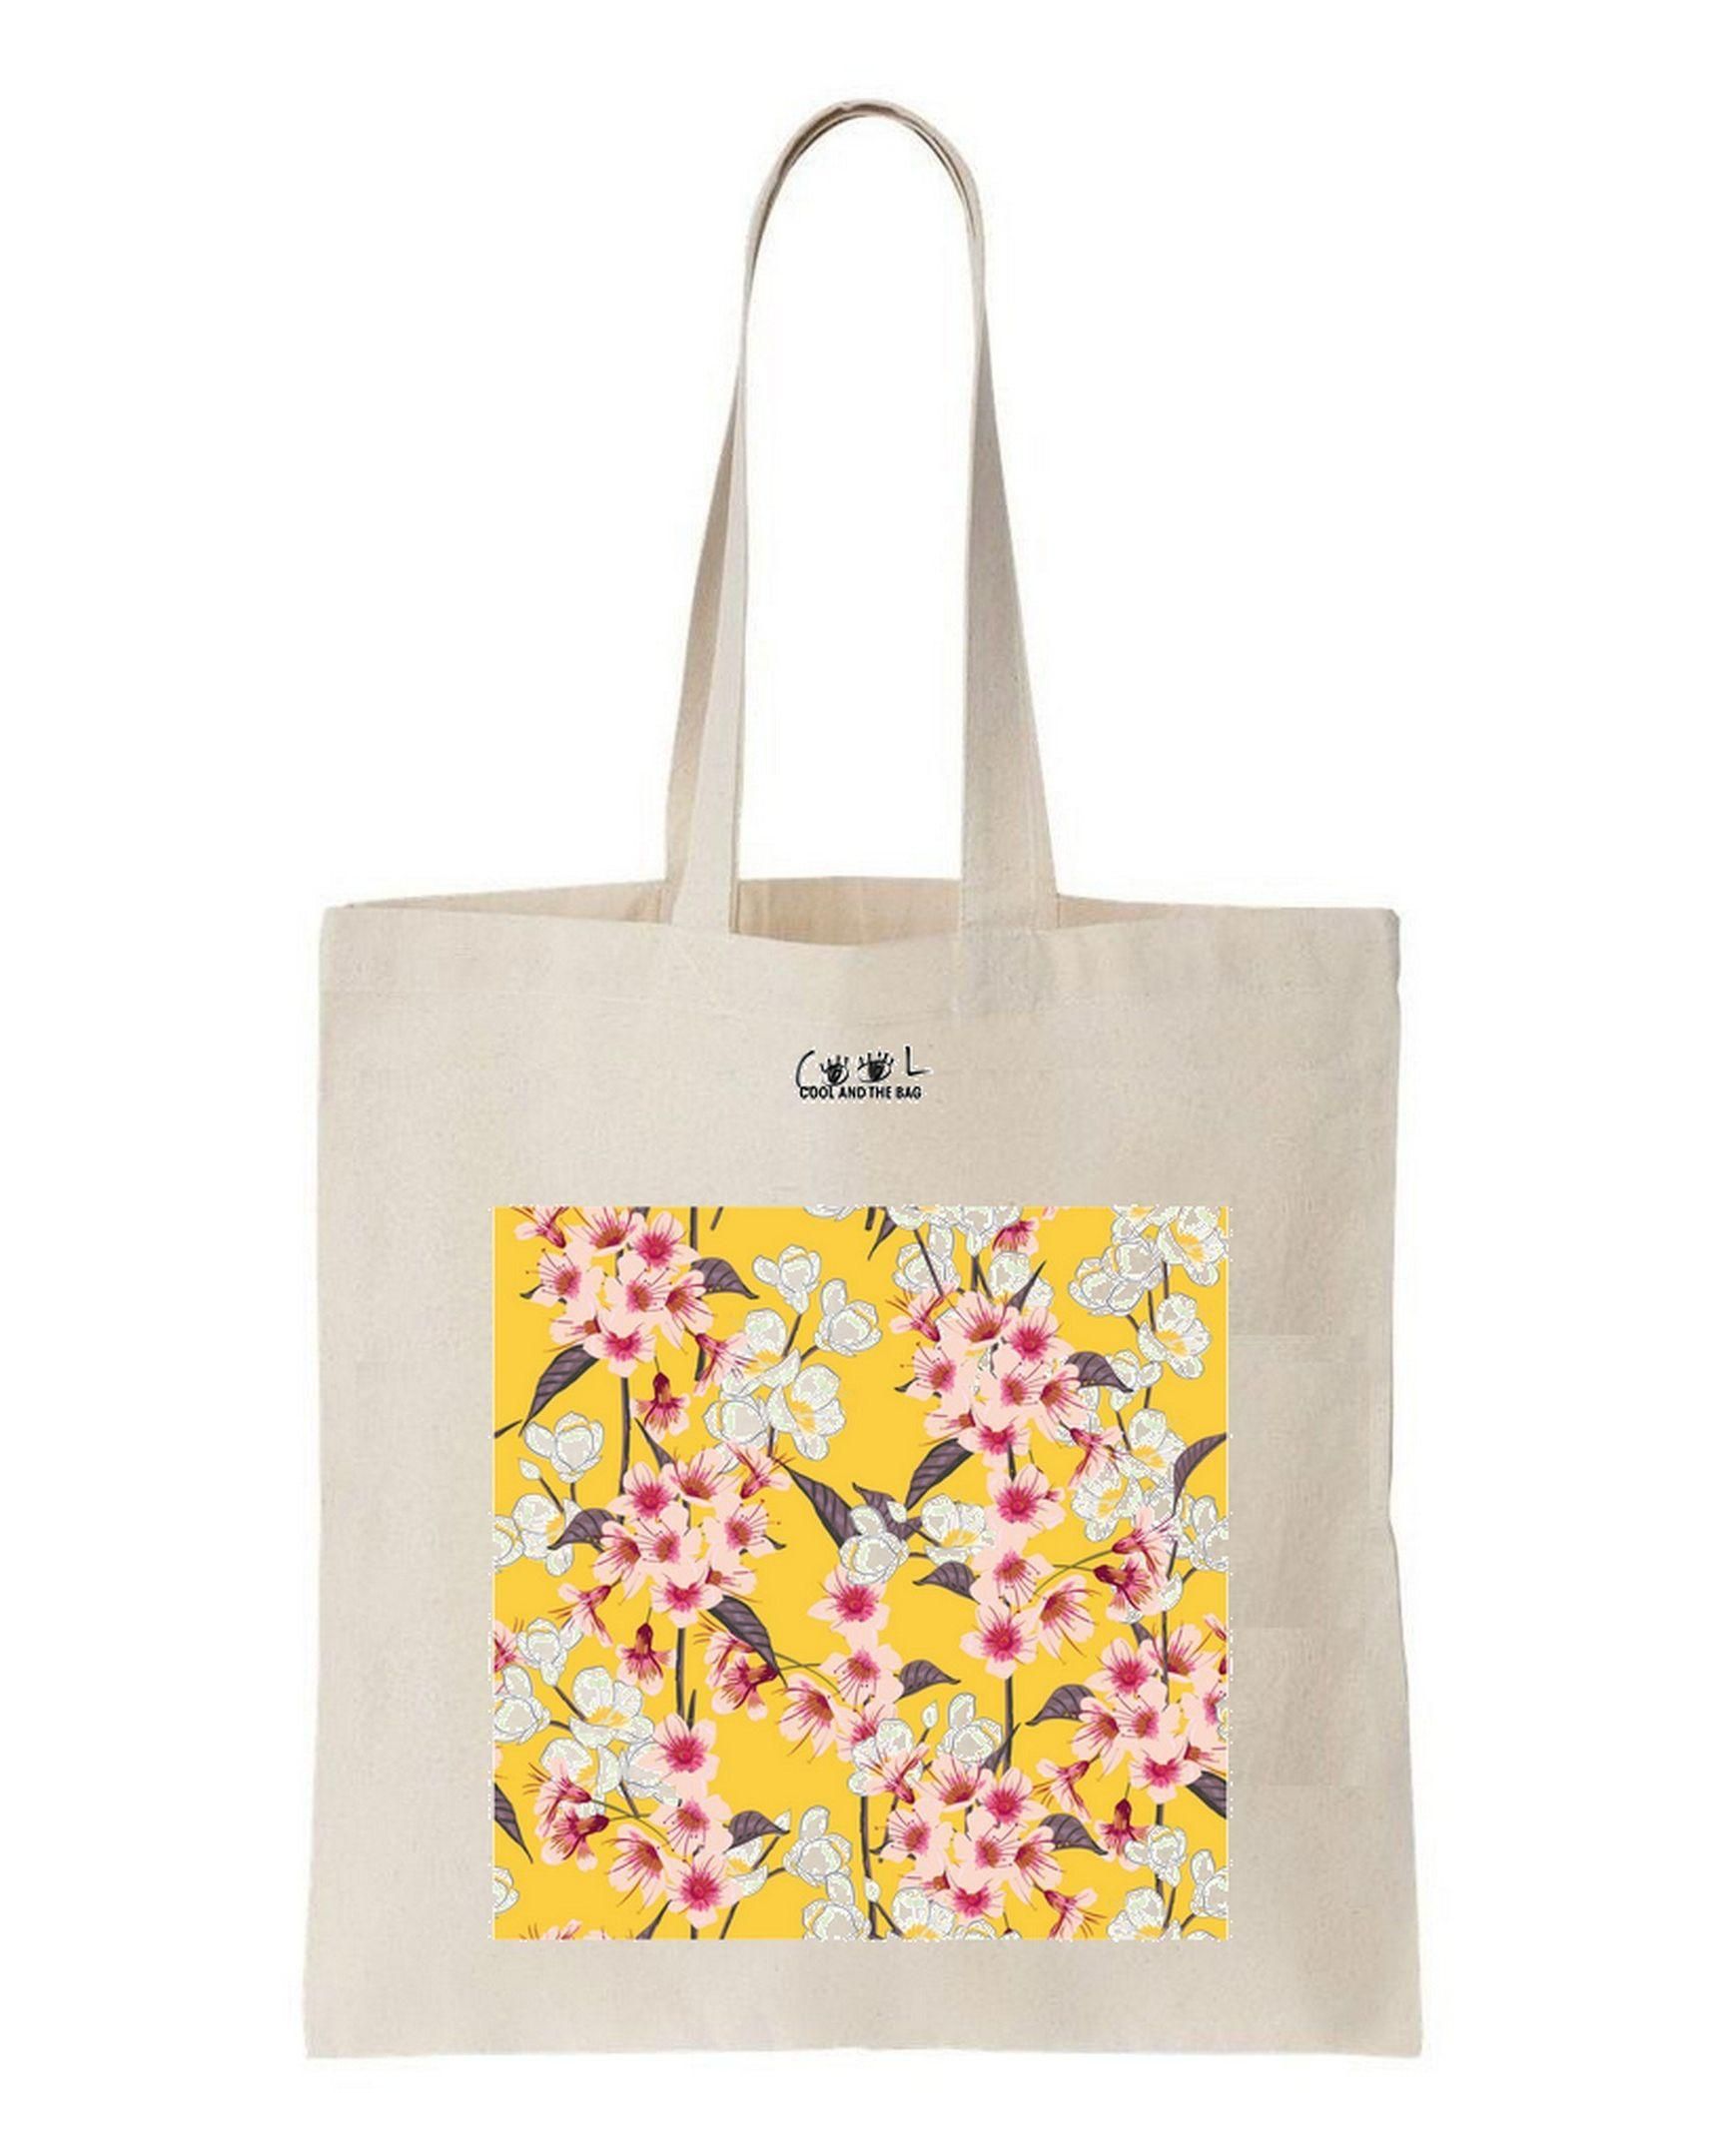 Awesome Flowers Printed Tote Bag Birthday Gift For Girl